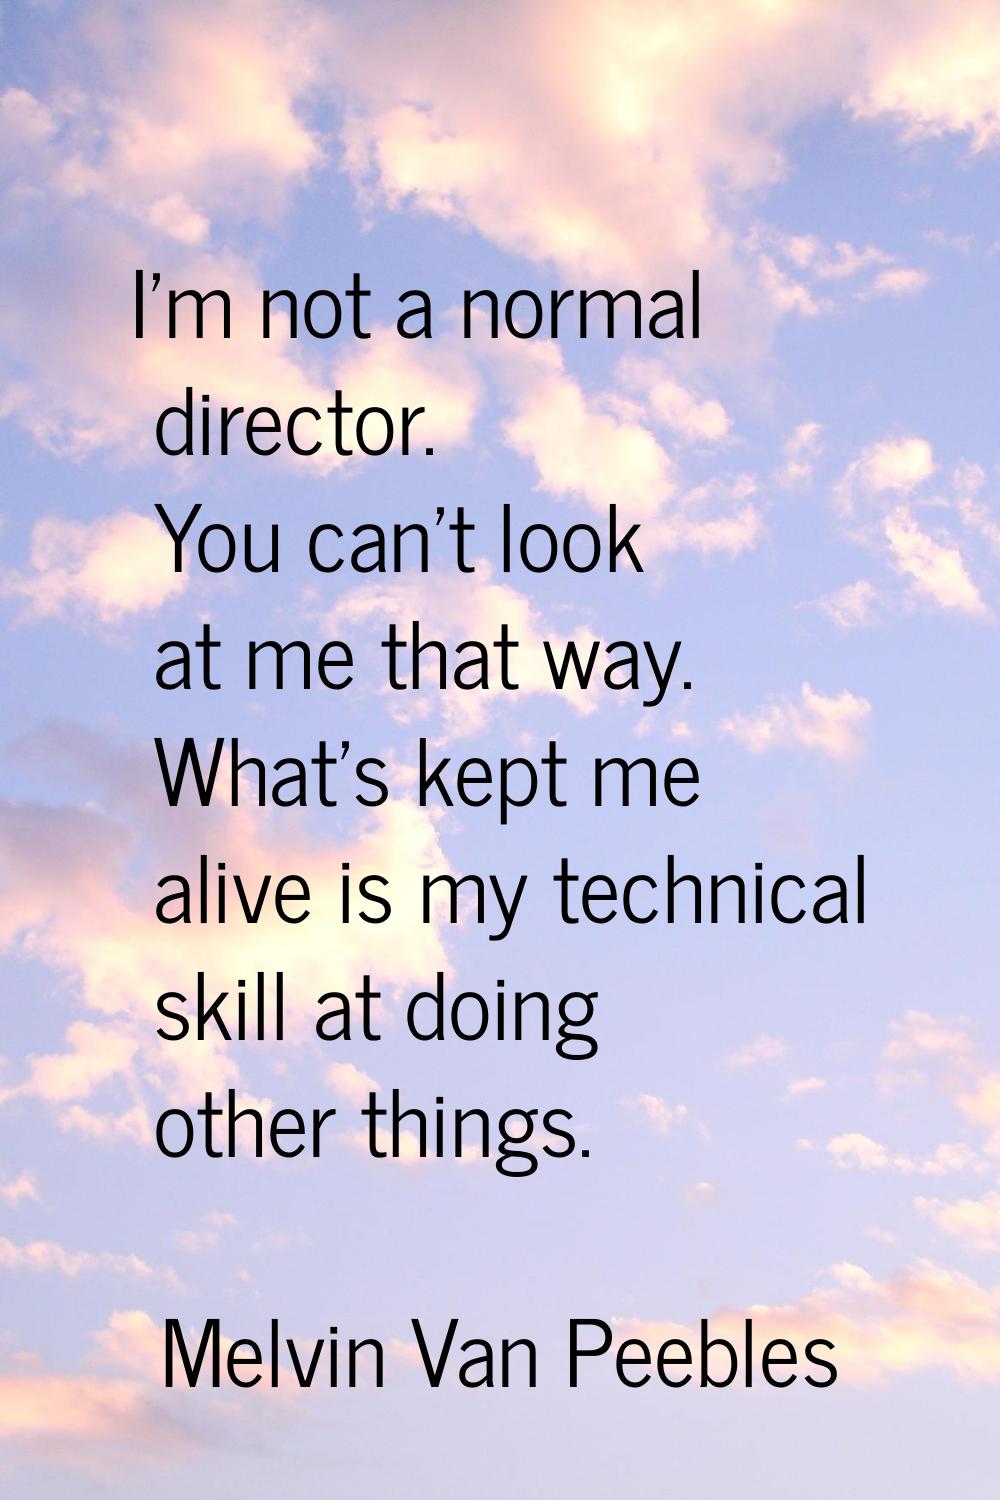 I'm not a normal director. You can't look at me that way. What's kept me alive is my technical skil